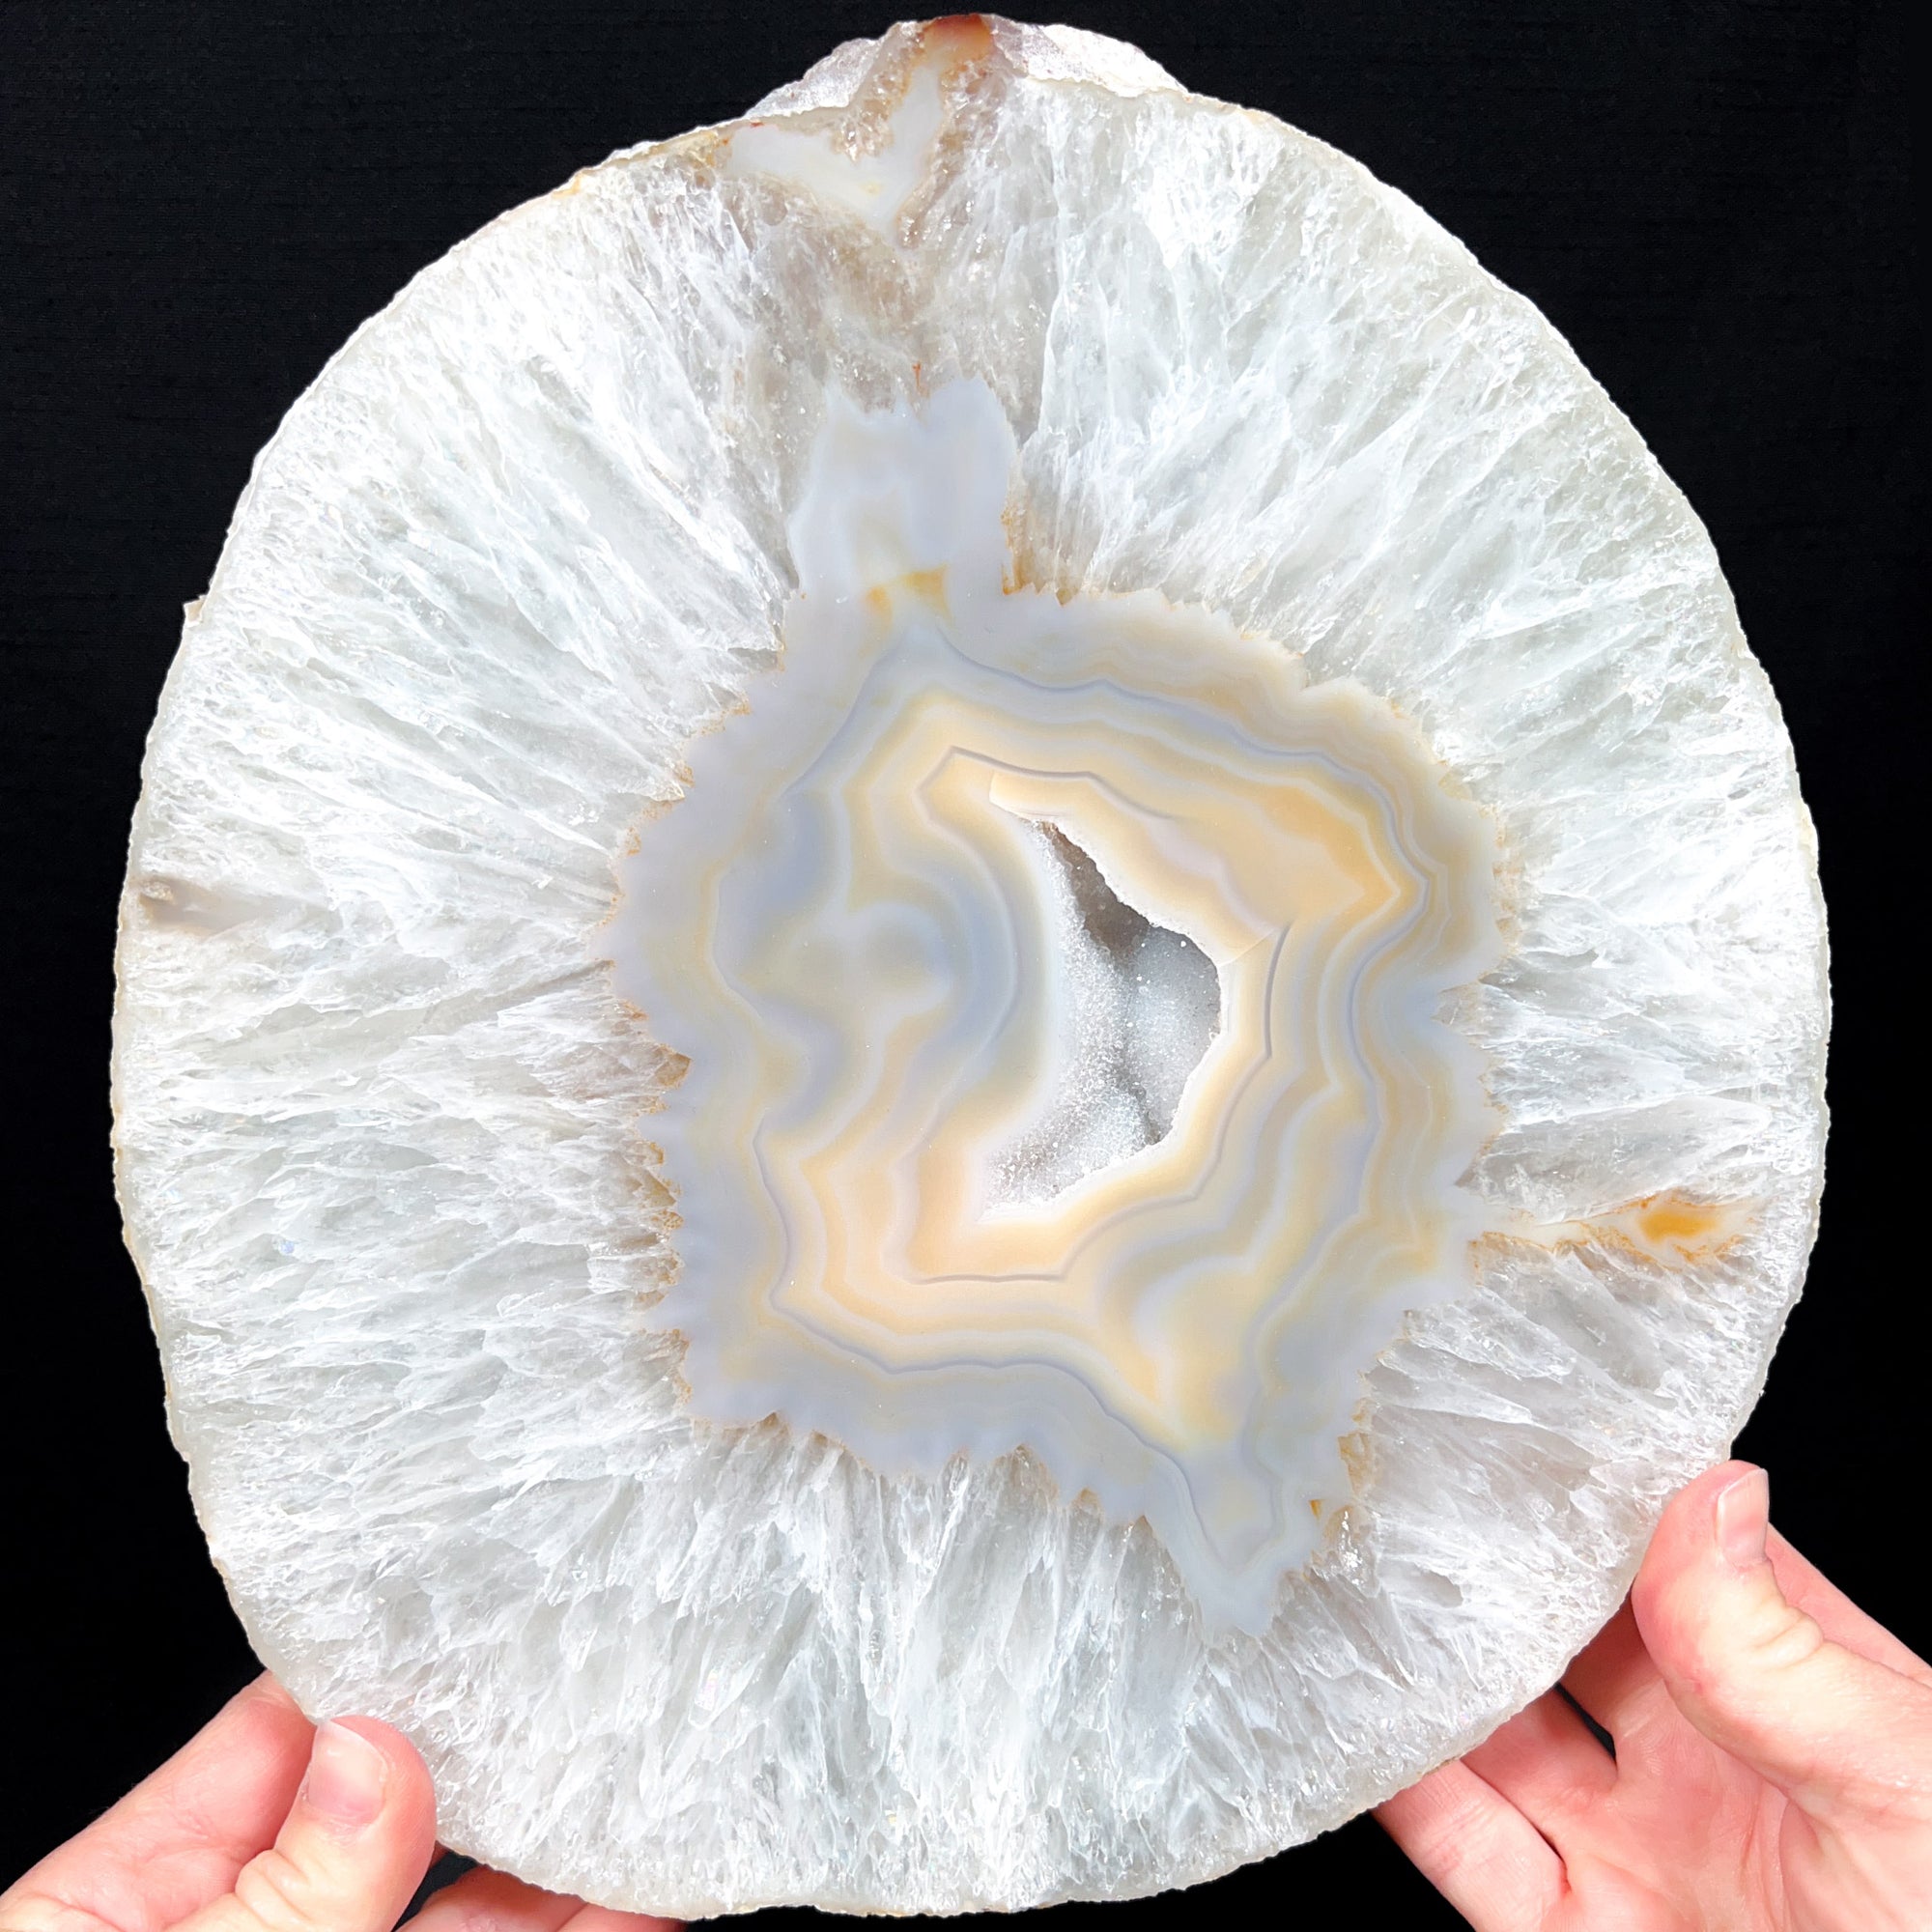 Large Geode Slice with Quartz and Agate Crystals